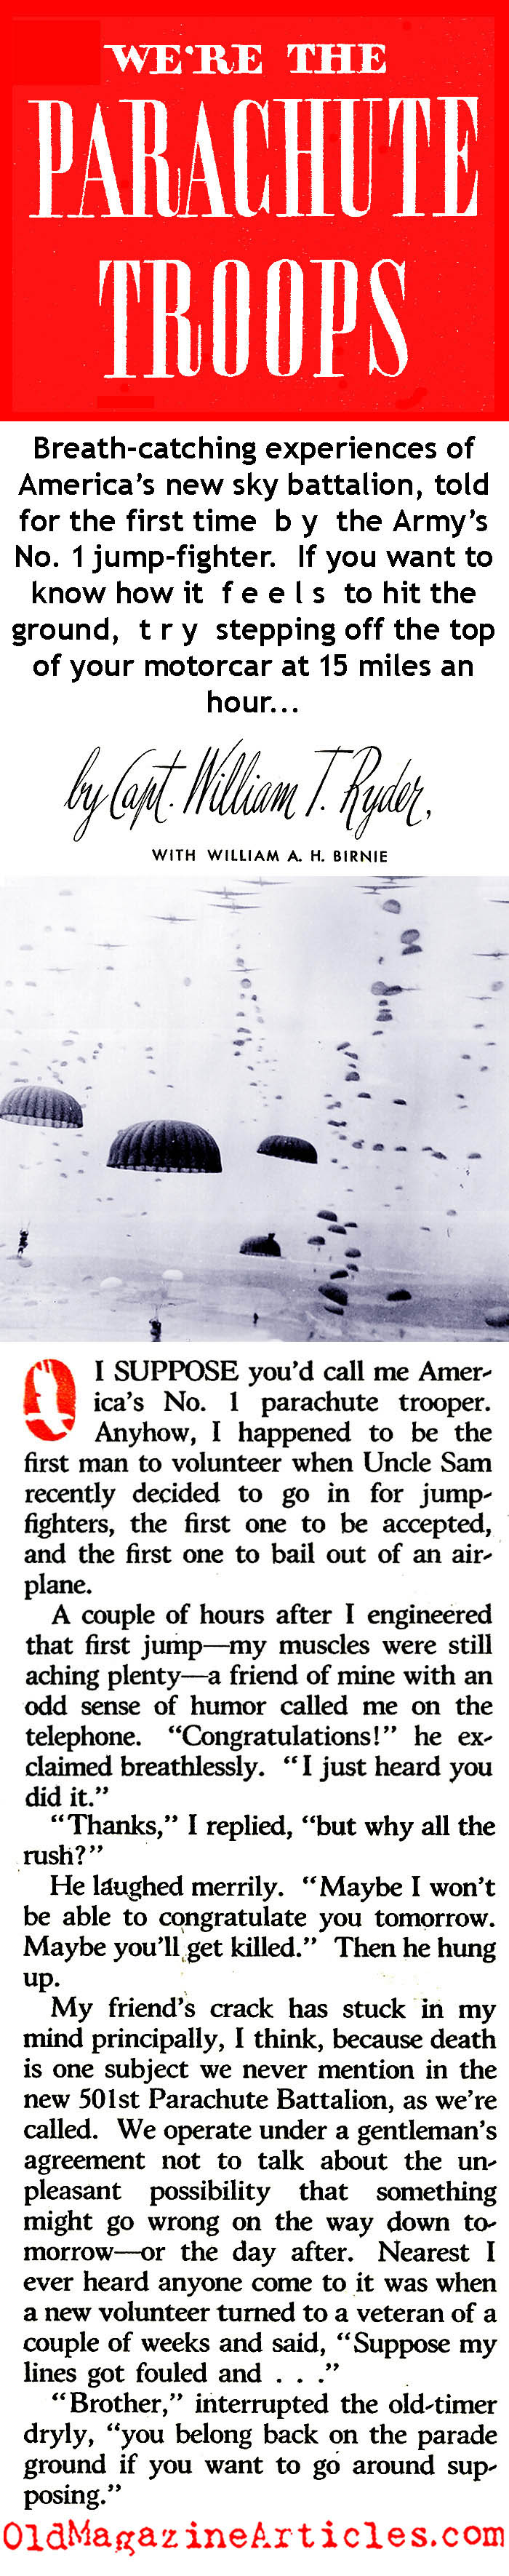 The Birth of American Parachute Infantry (The American Magazine, 1941)